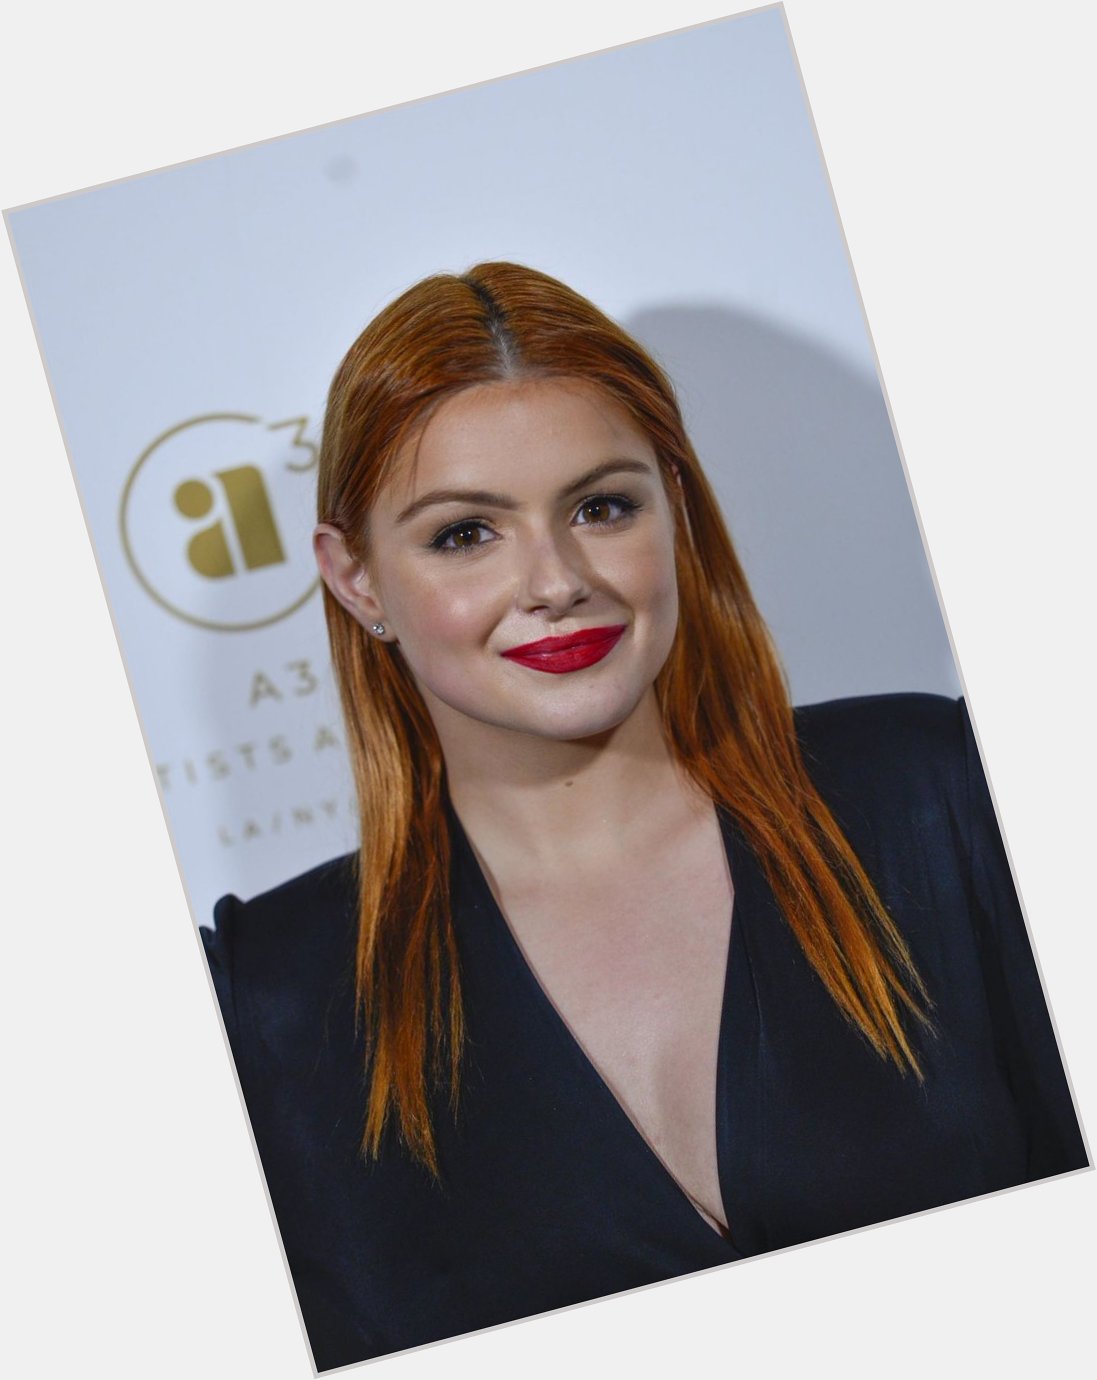 Happy 24th birthday to (Ariel Winter)! The actress who played Alex Dunphy from Modern Family. 